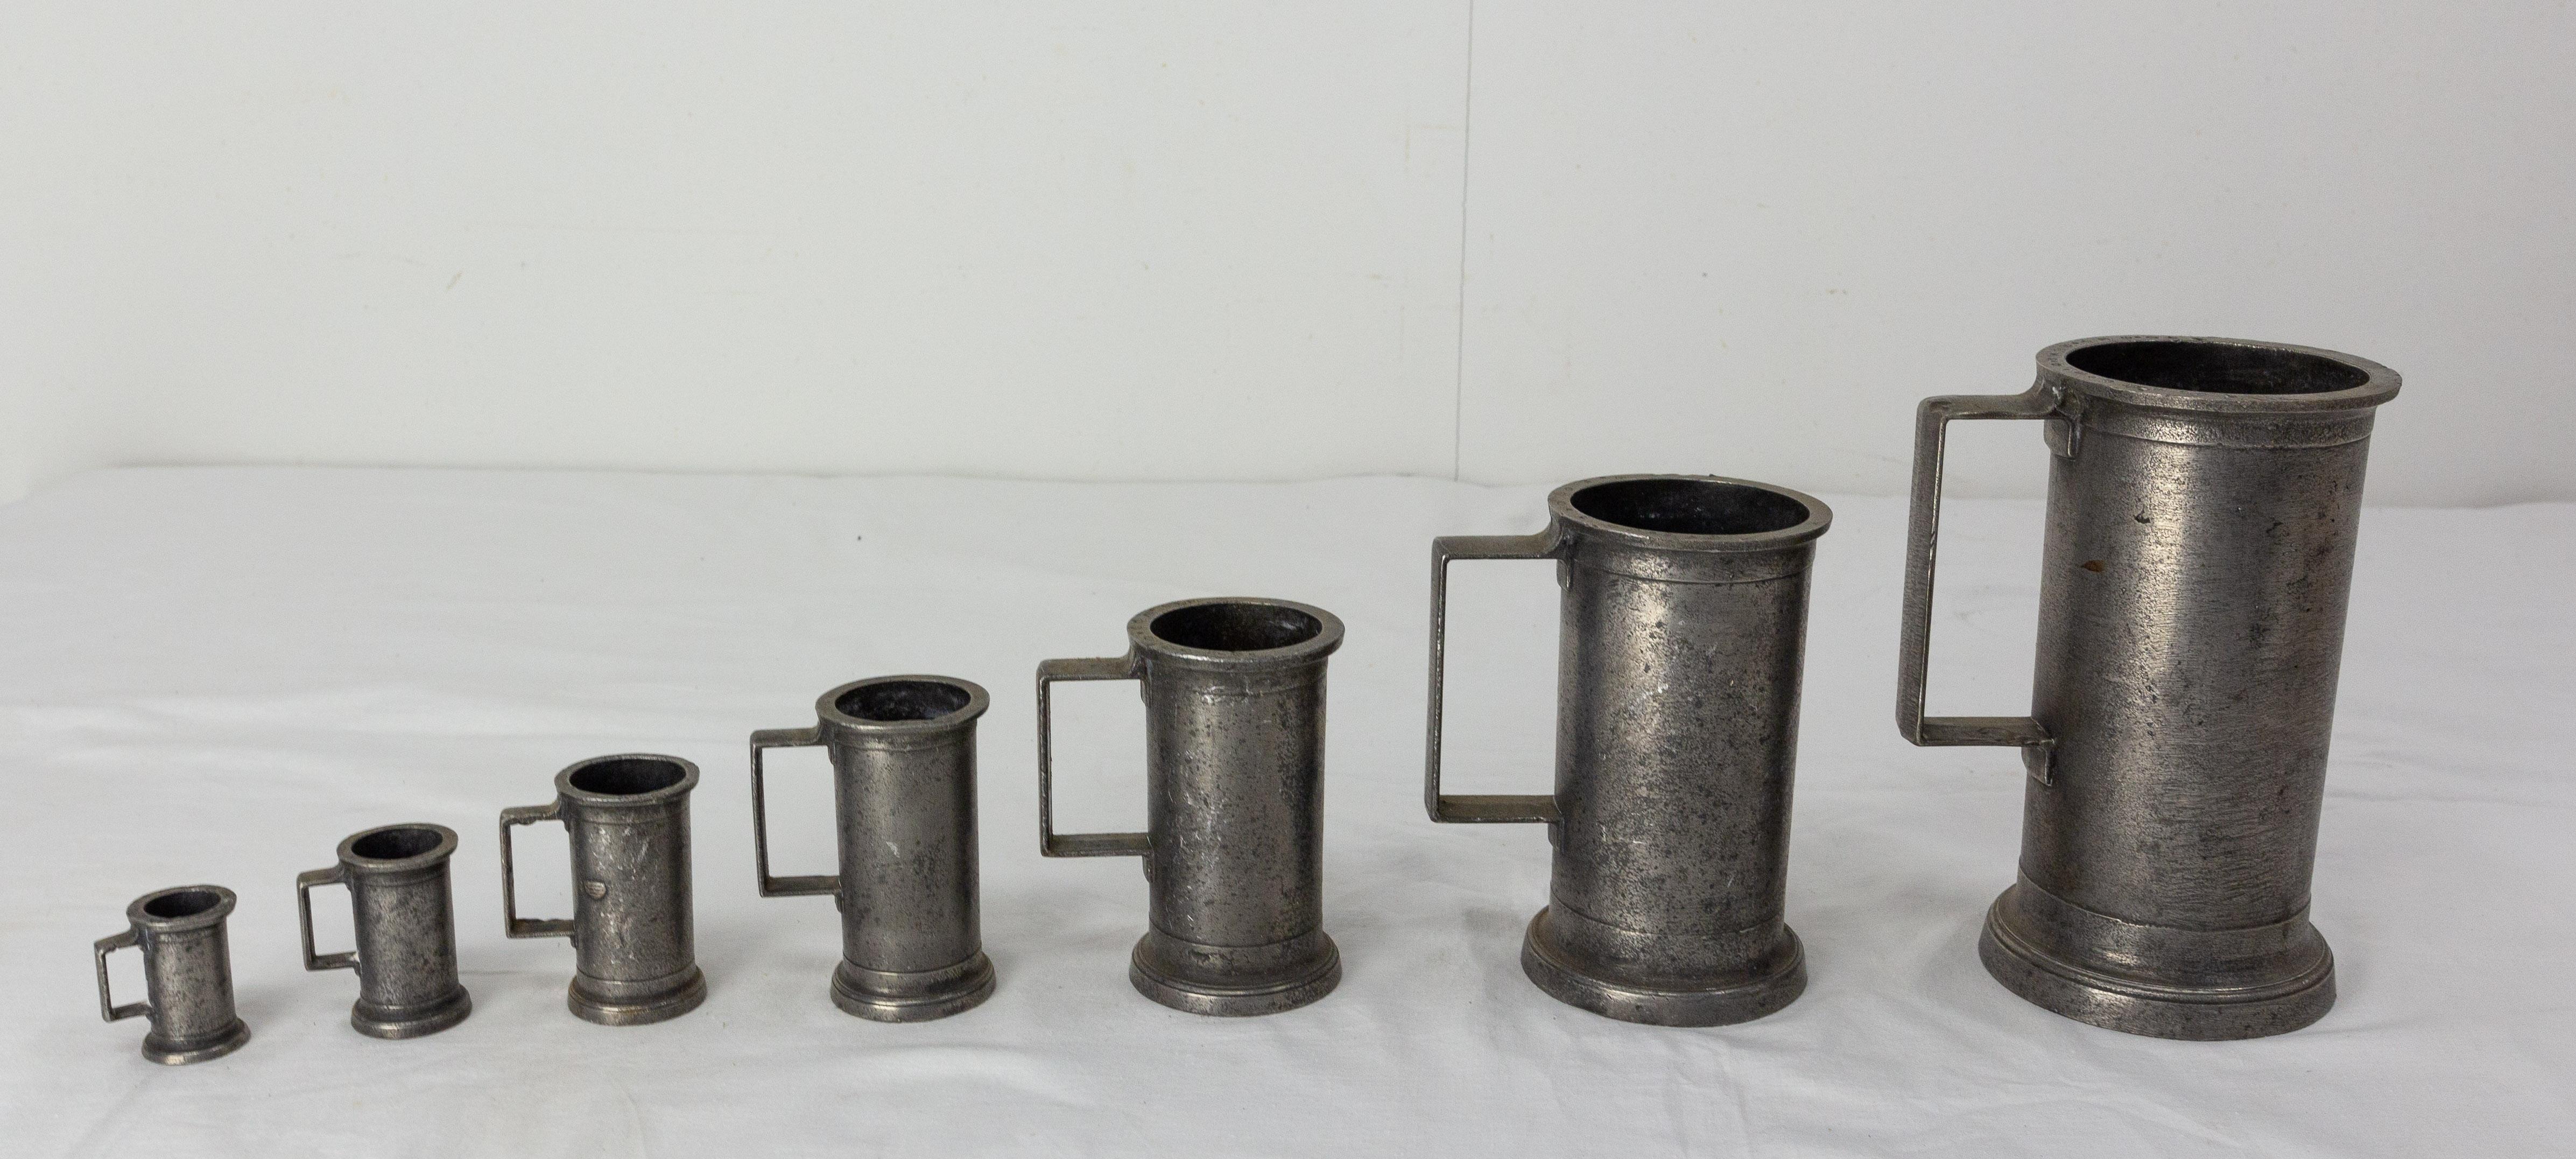 Industrial Series of Measuring Tins, Trade Equipment, France, 19th Century For Sale